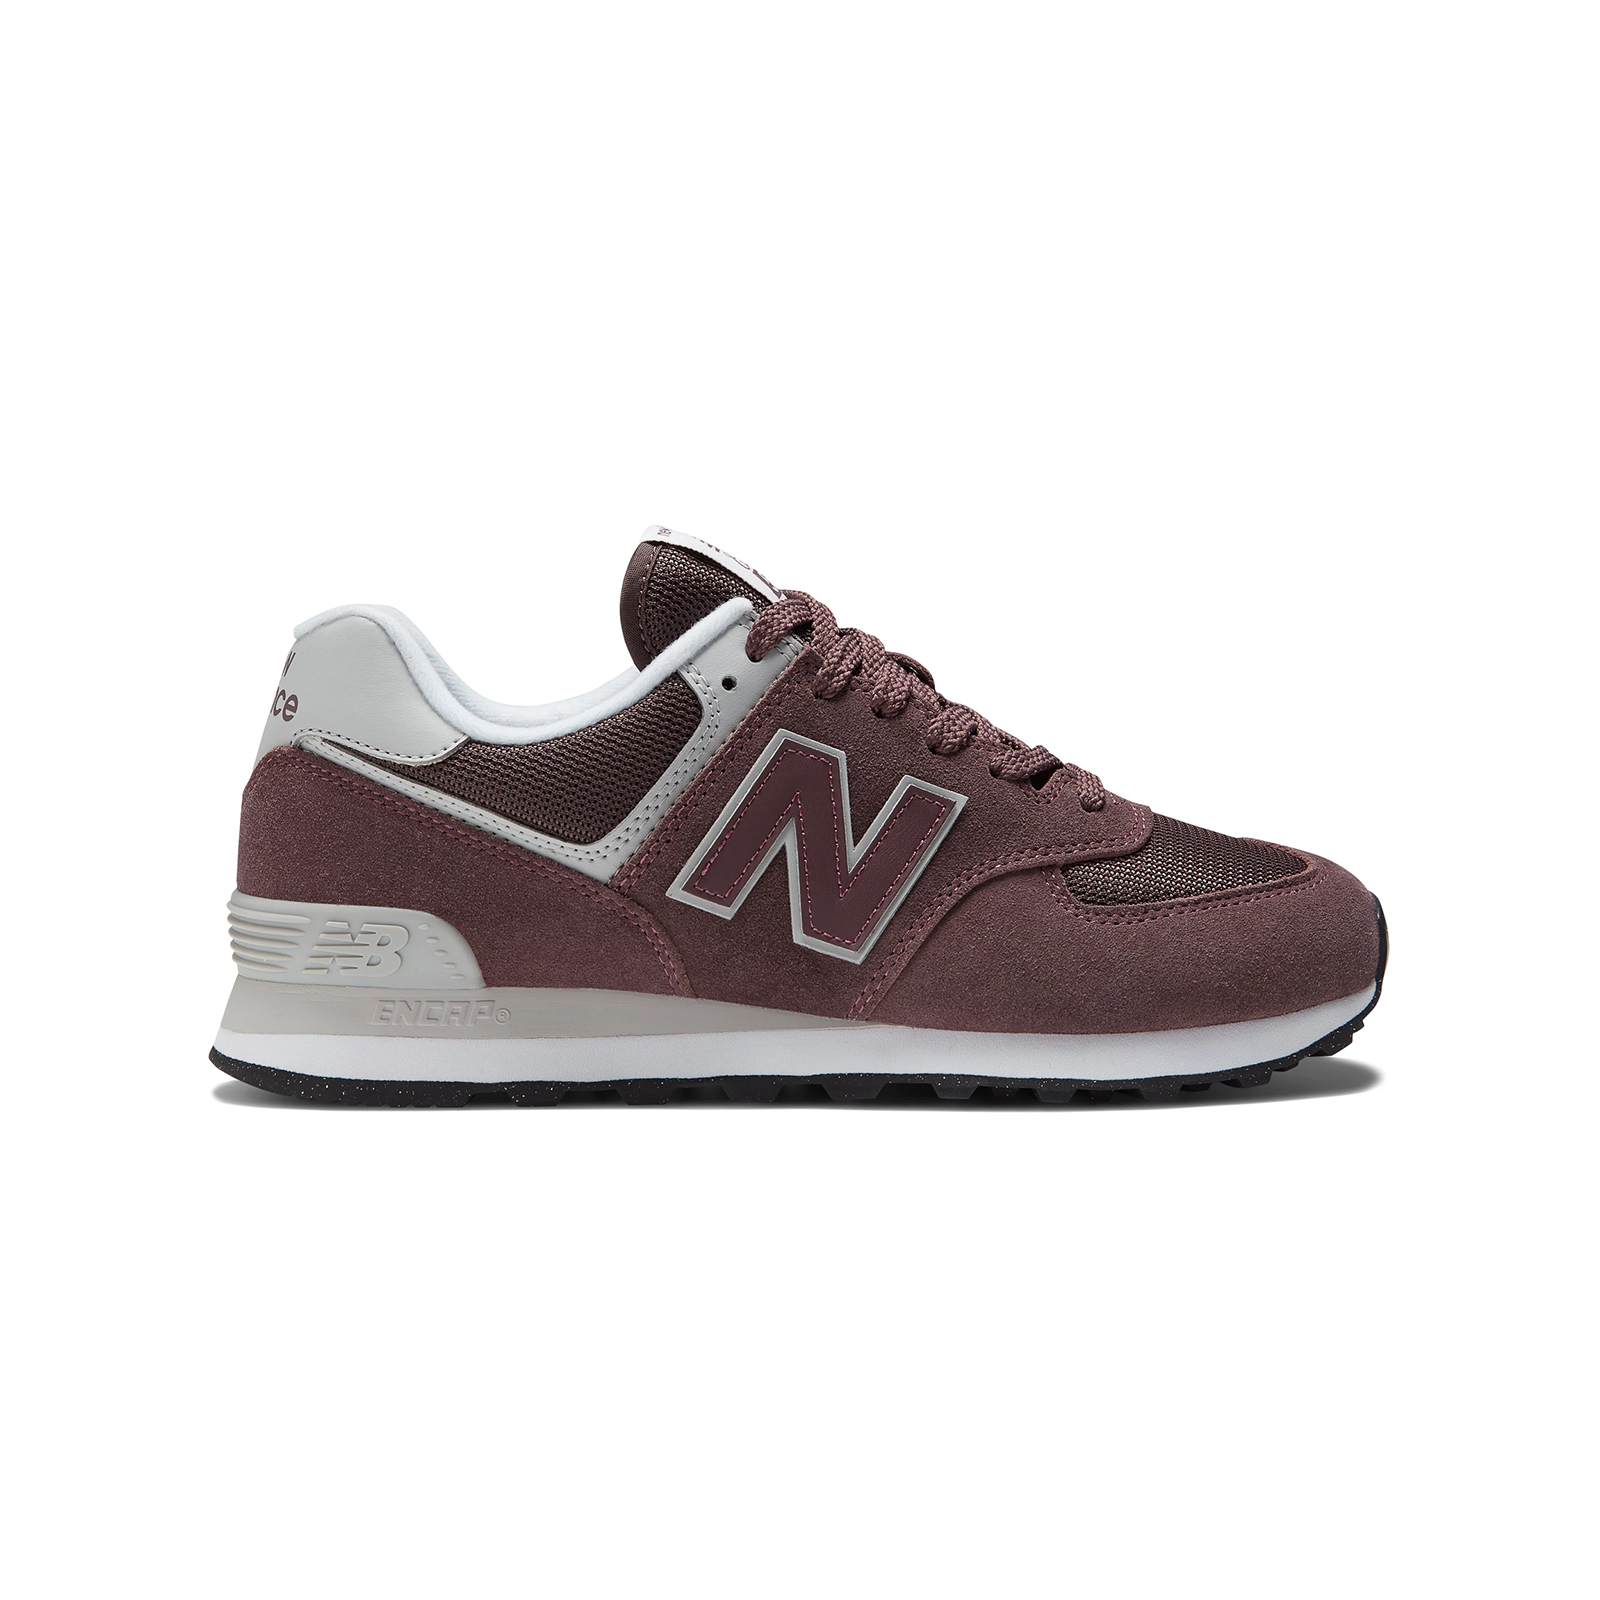 New balance ls - SHOES CLASSIC RUNNING - BROWN Ανδρικά > Παπούτσια > Sneaker > Παπούτσι Low Cut